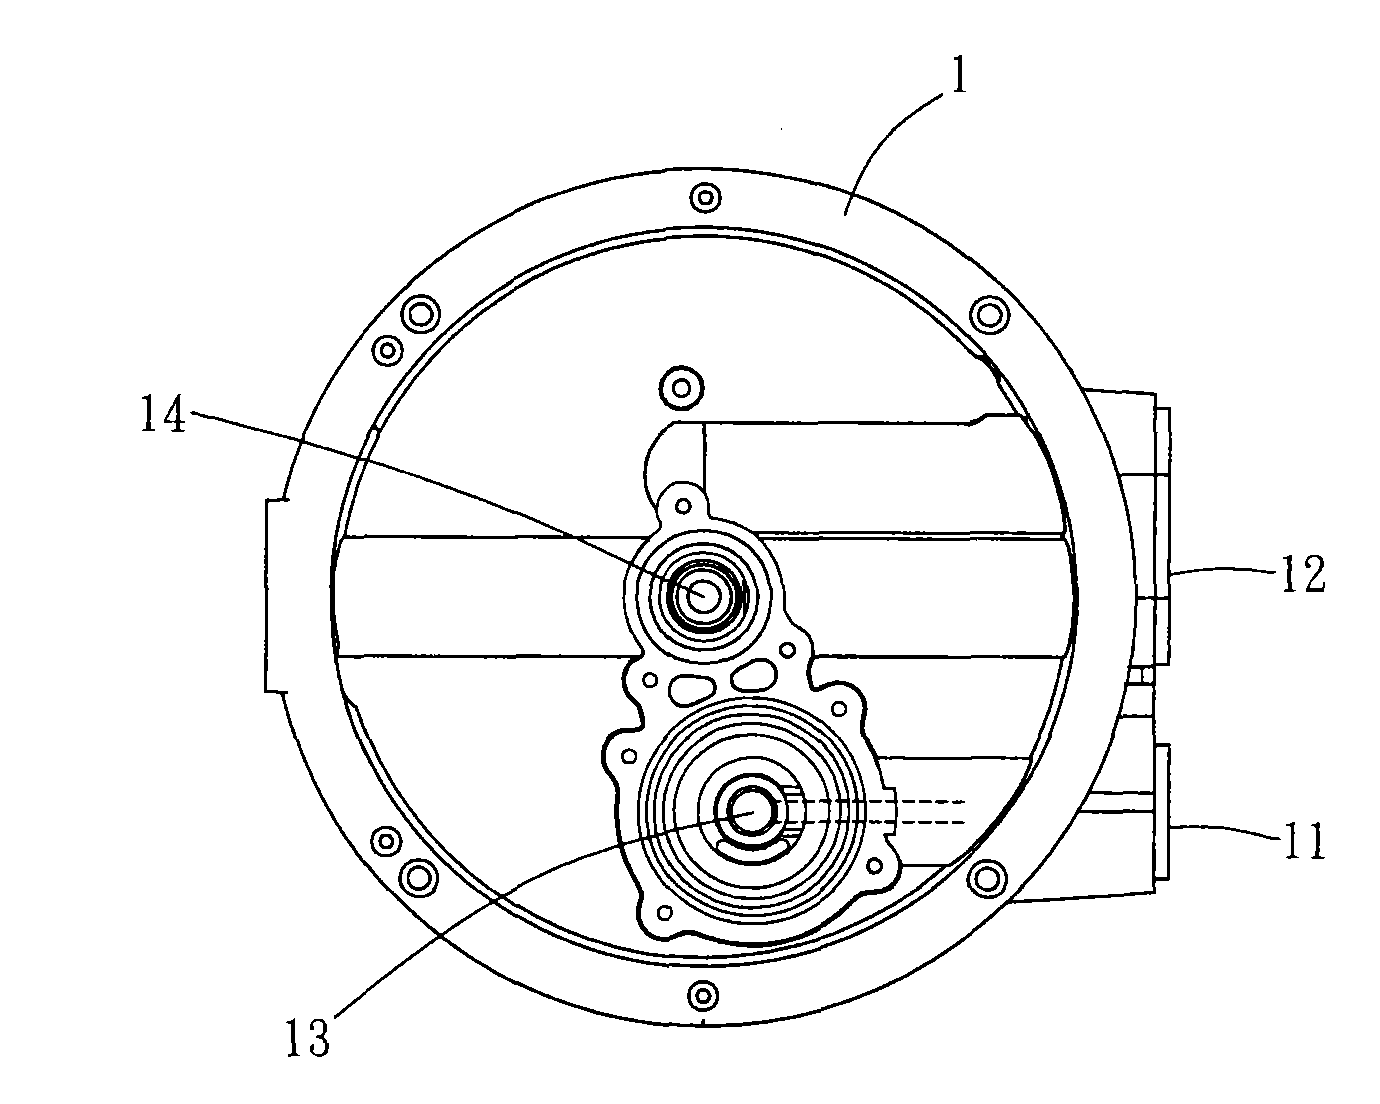 Flow regulating device for water purifier